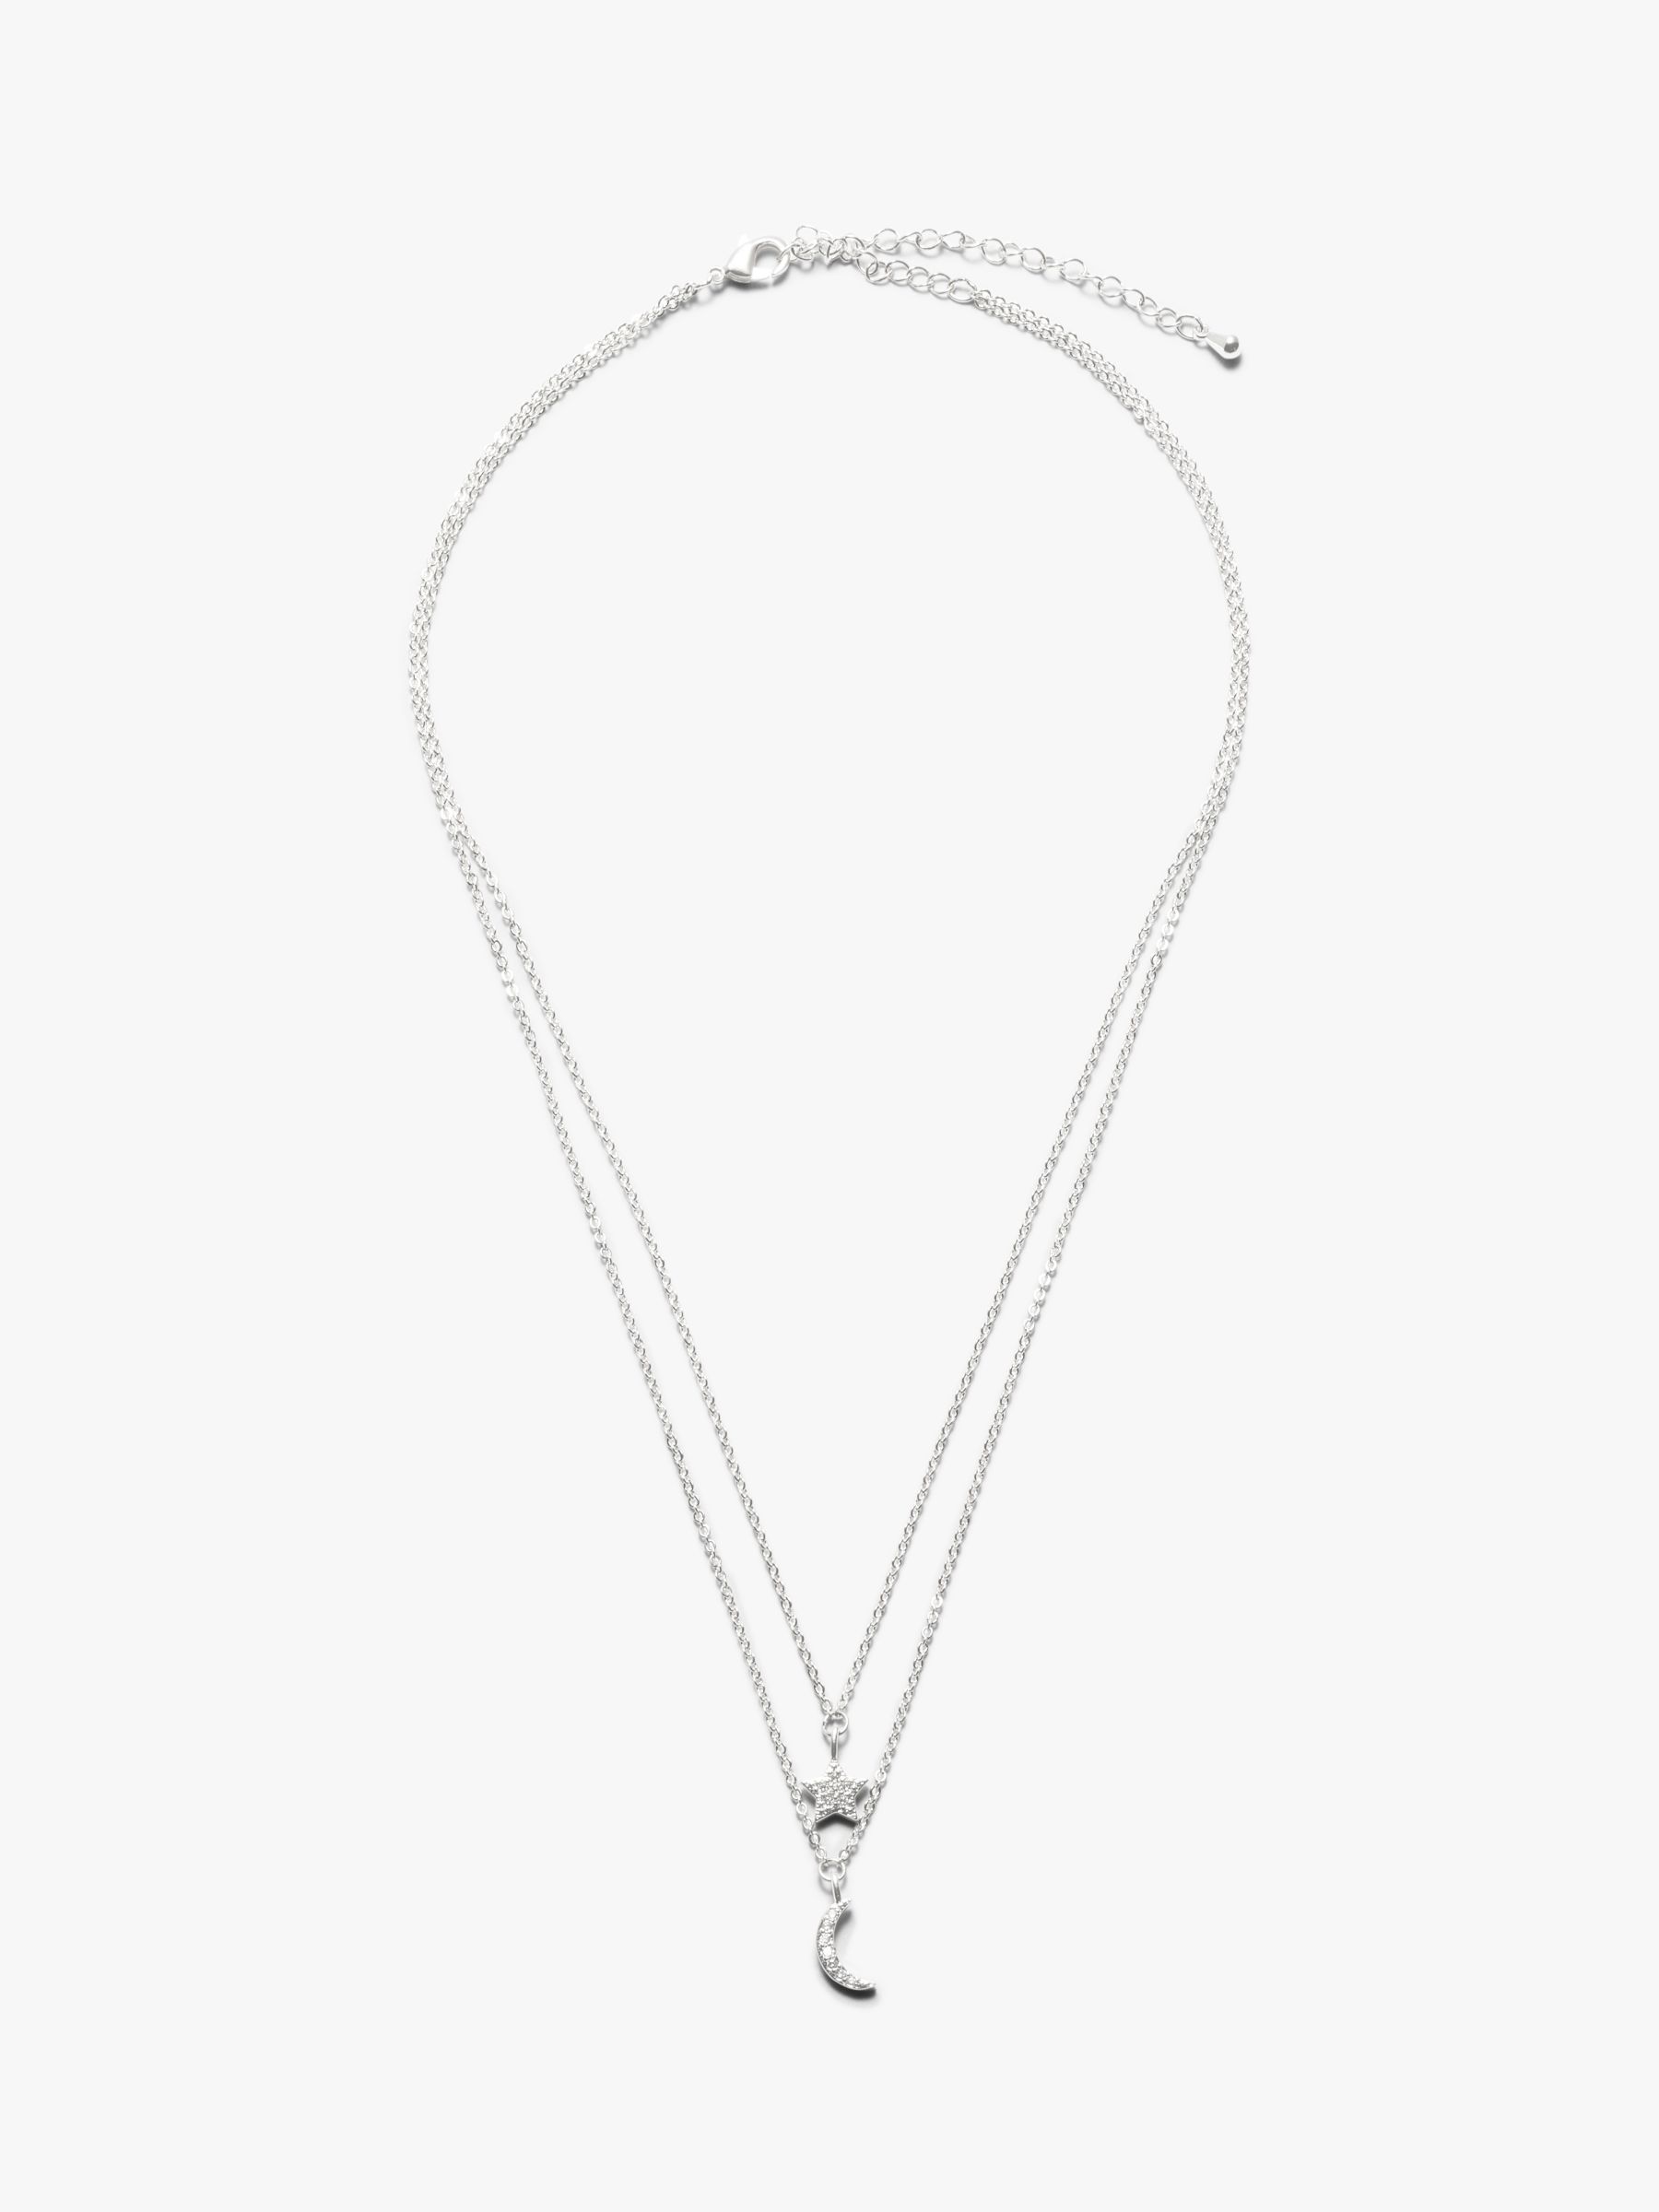 Womens' Necklaces | Jewellery | John Lewis & Partners